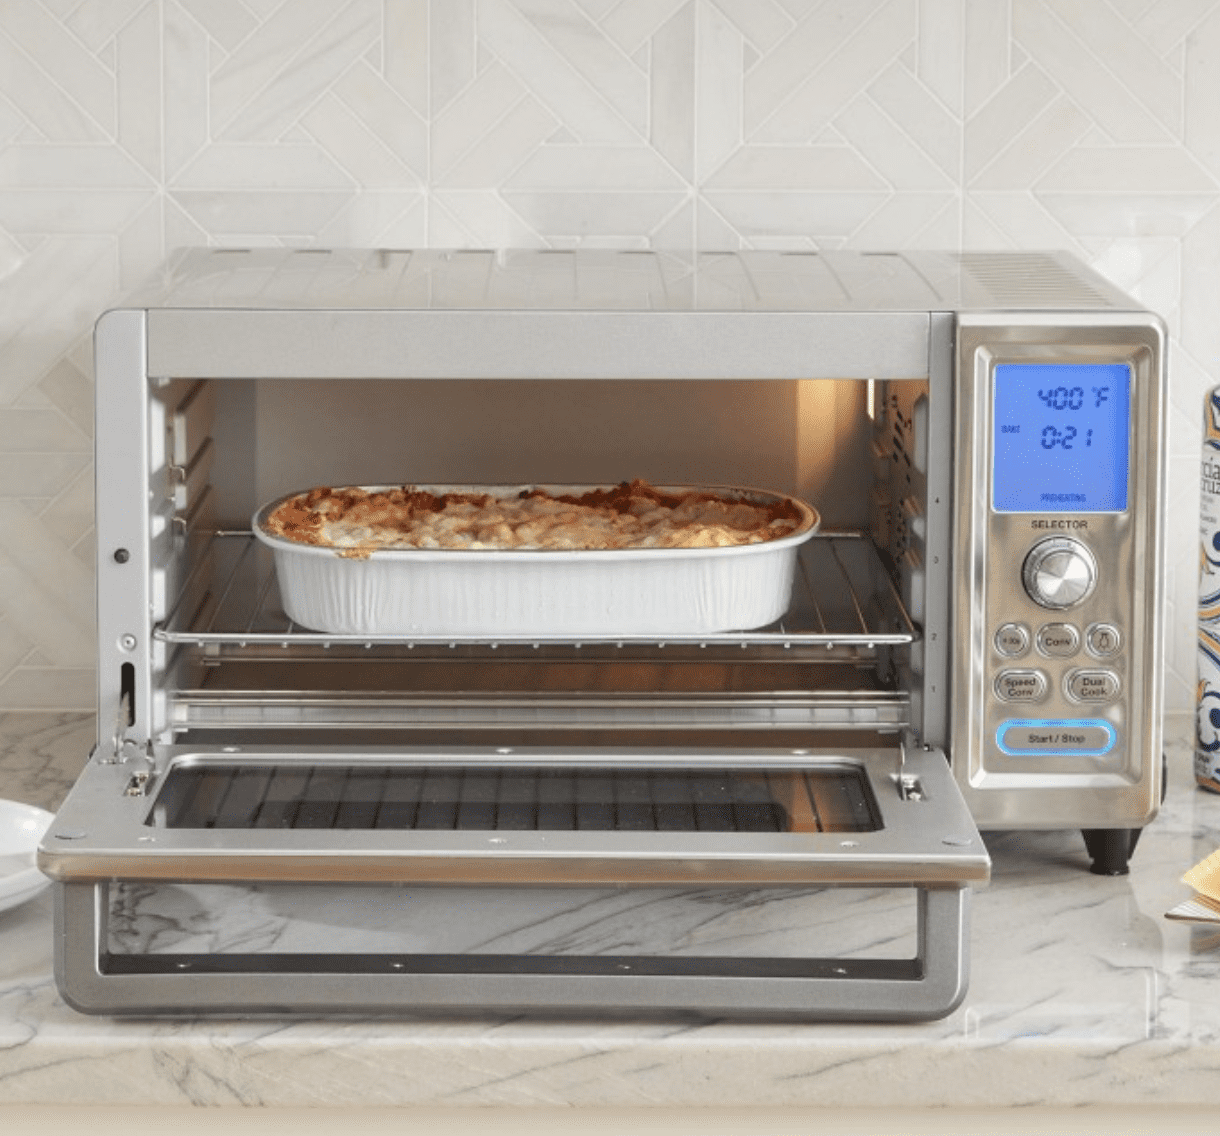 7 Best Smart Ovens for Every Budget